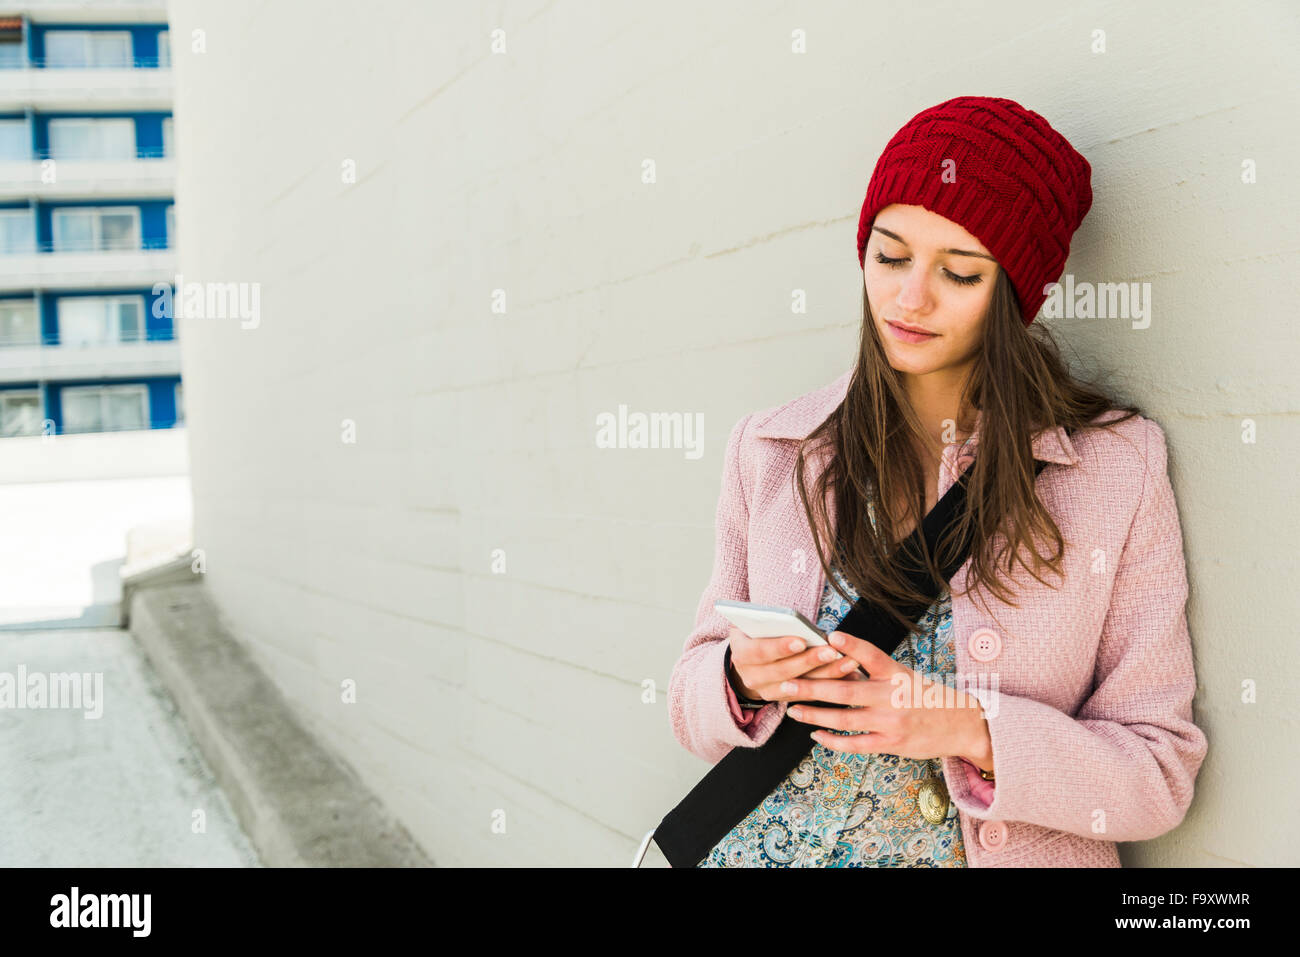 Young woman leaning against concrete wall looking at cell phone Stock Photo